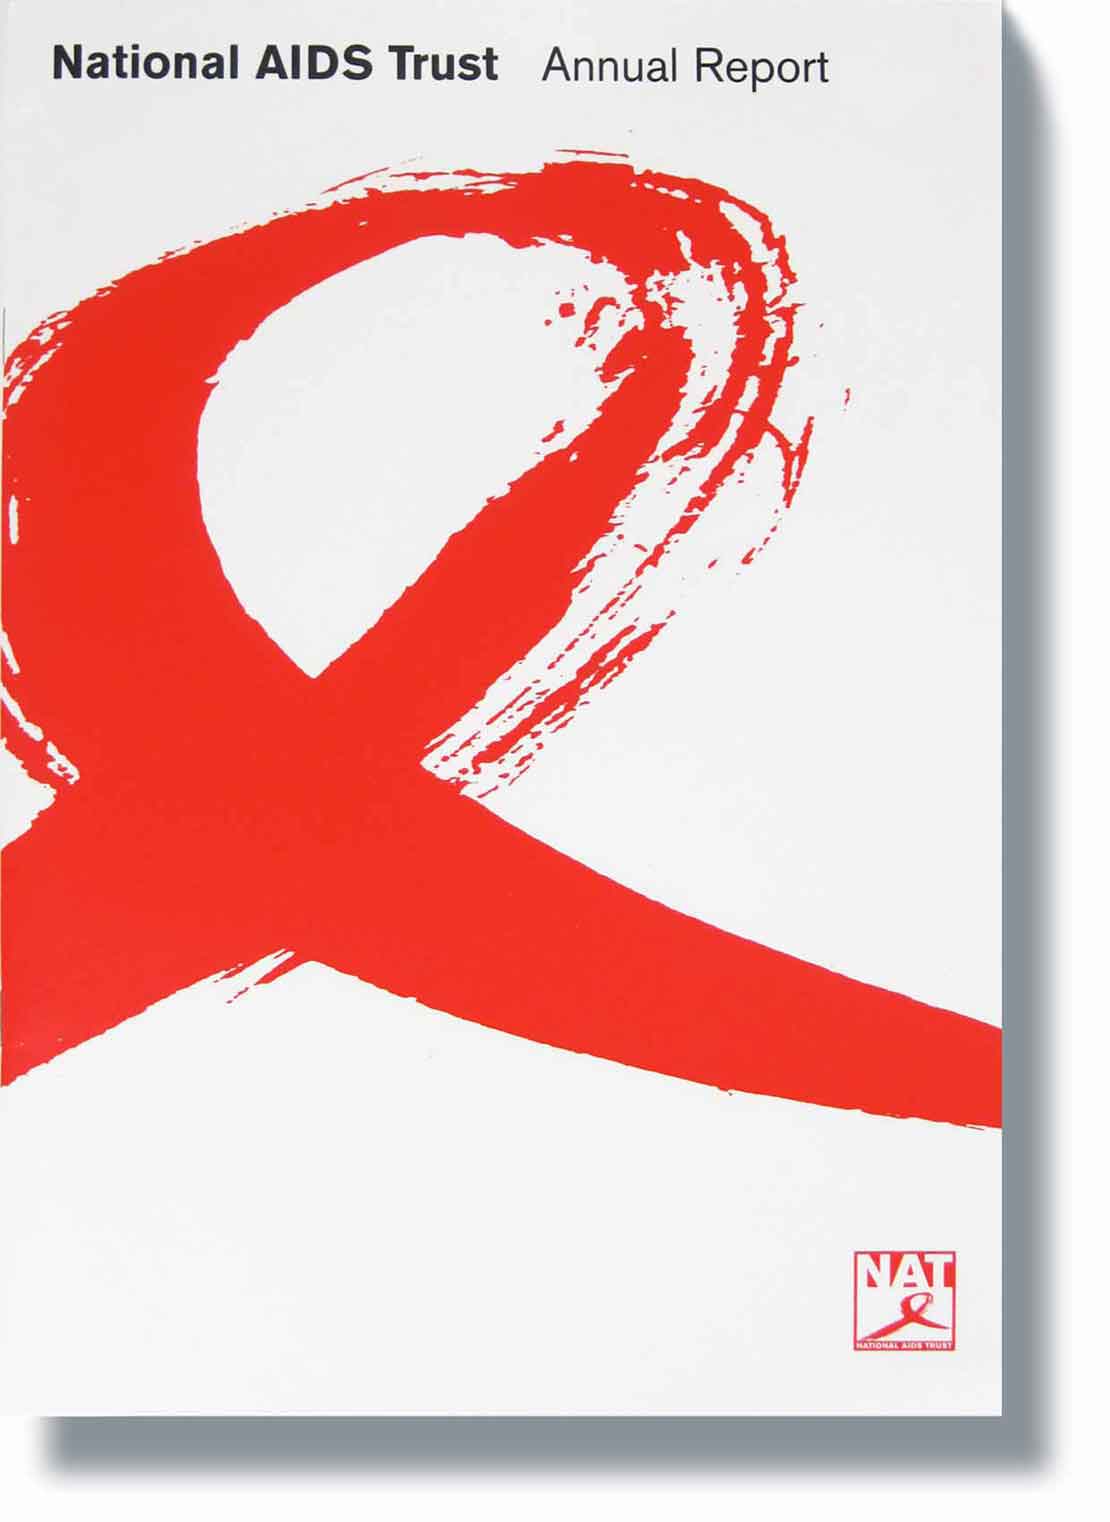 National Aids Trust Annual Report designed by ideology.uk.com